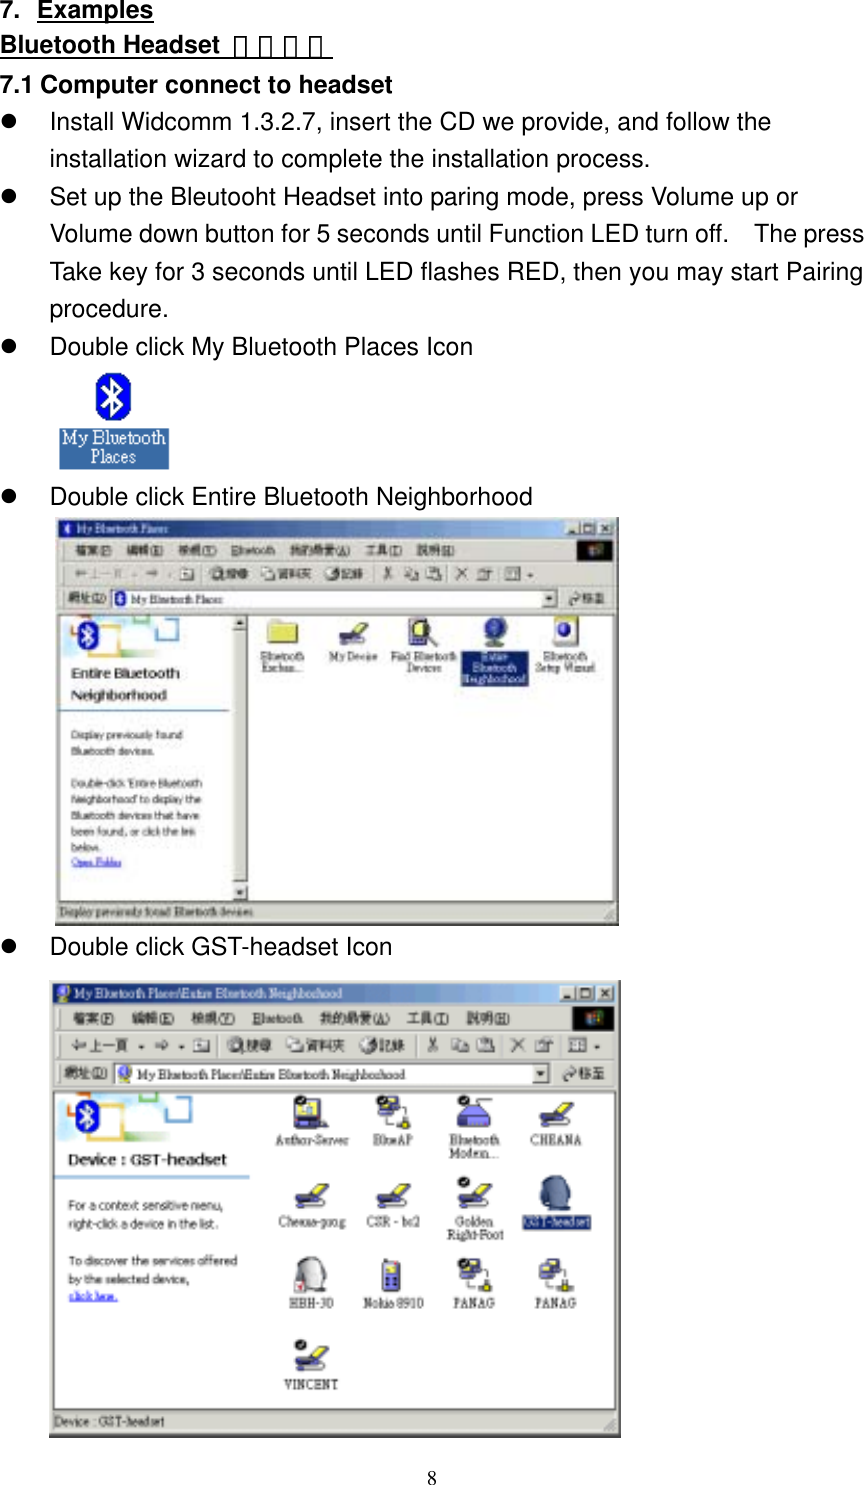 7. Examples Bluetooth Headset  應用範列 7.1 Computer connect to headset   Install Widcomm 1.3.2.7, insert the CD we provide, and follow the installation wizard to complete the installation process.   Set up the Bleutooht Headset into paring mode, press Volume up or Volume down button for 5 seconds until Function LED turn off.    The press Take key for 3 seconds until LED flashes RED, then you may start Pairing procedure.   Double click My Bluetooth Places Icon    Double click Entire Bluetooth Neighborhood    Double click GST-headset Icon   8